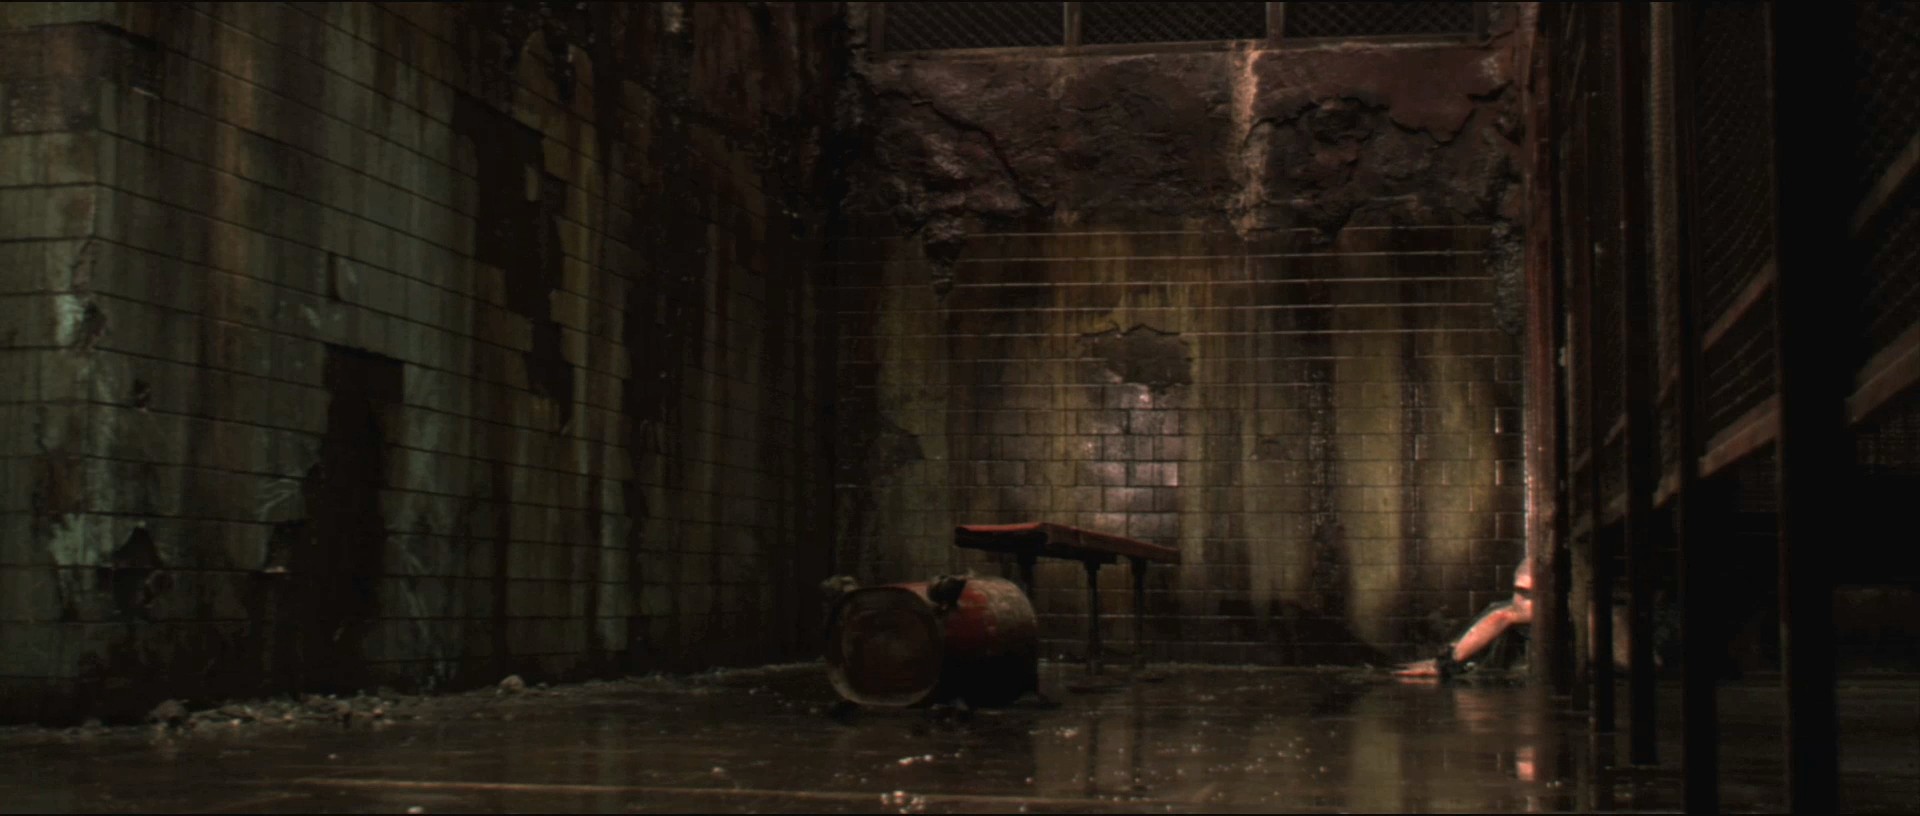 Silent hill room steam фото 104